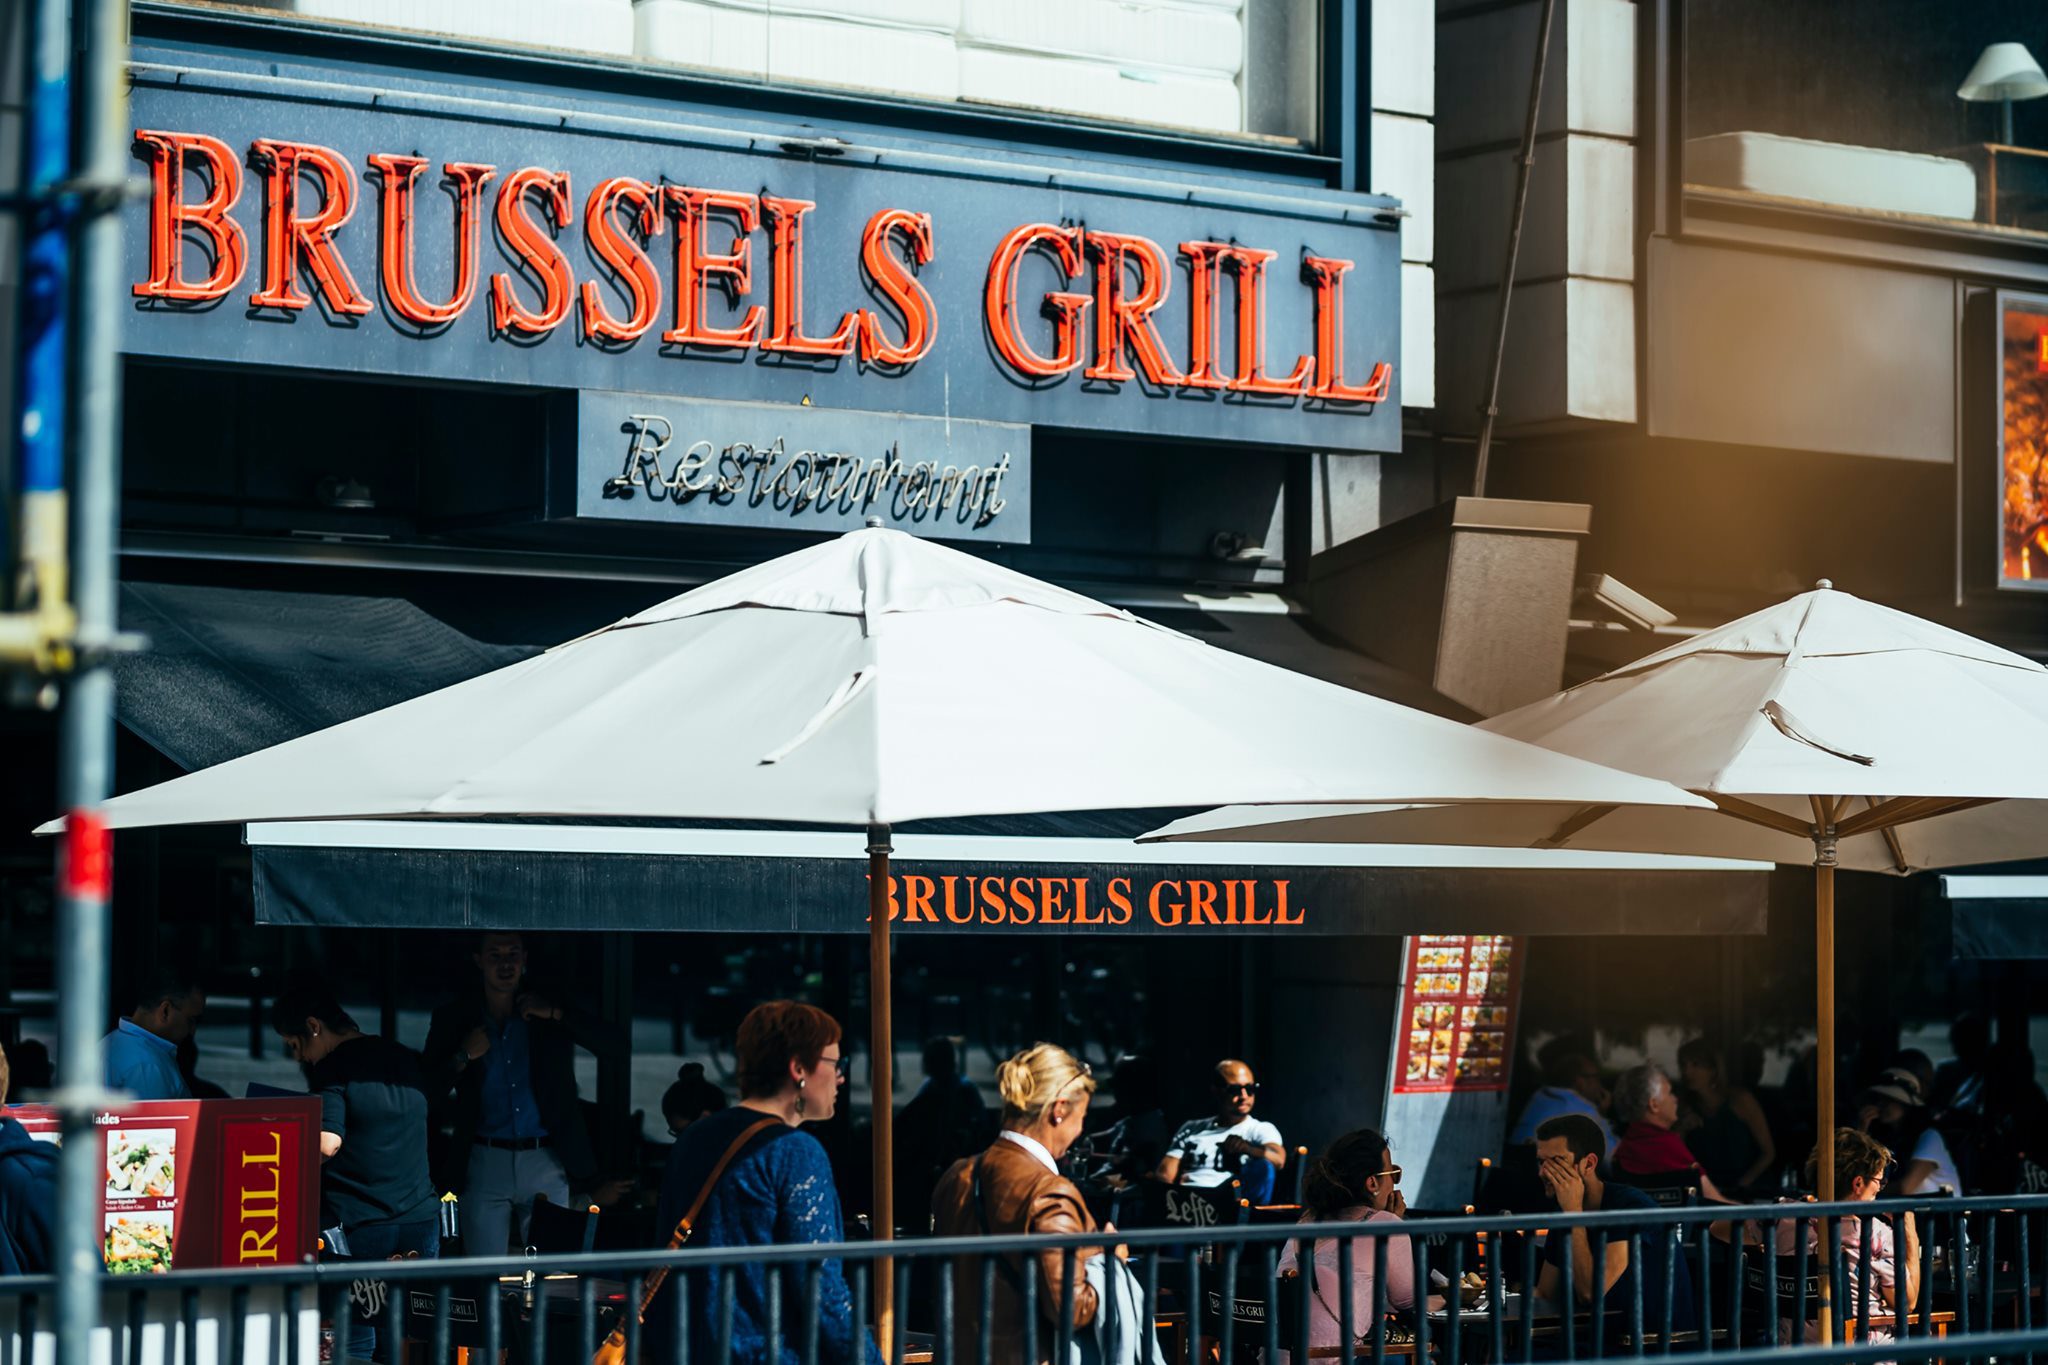 BRUSSELS GRILL